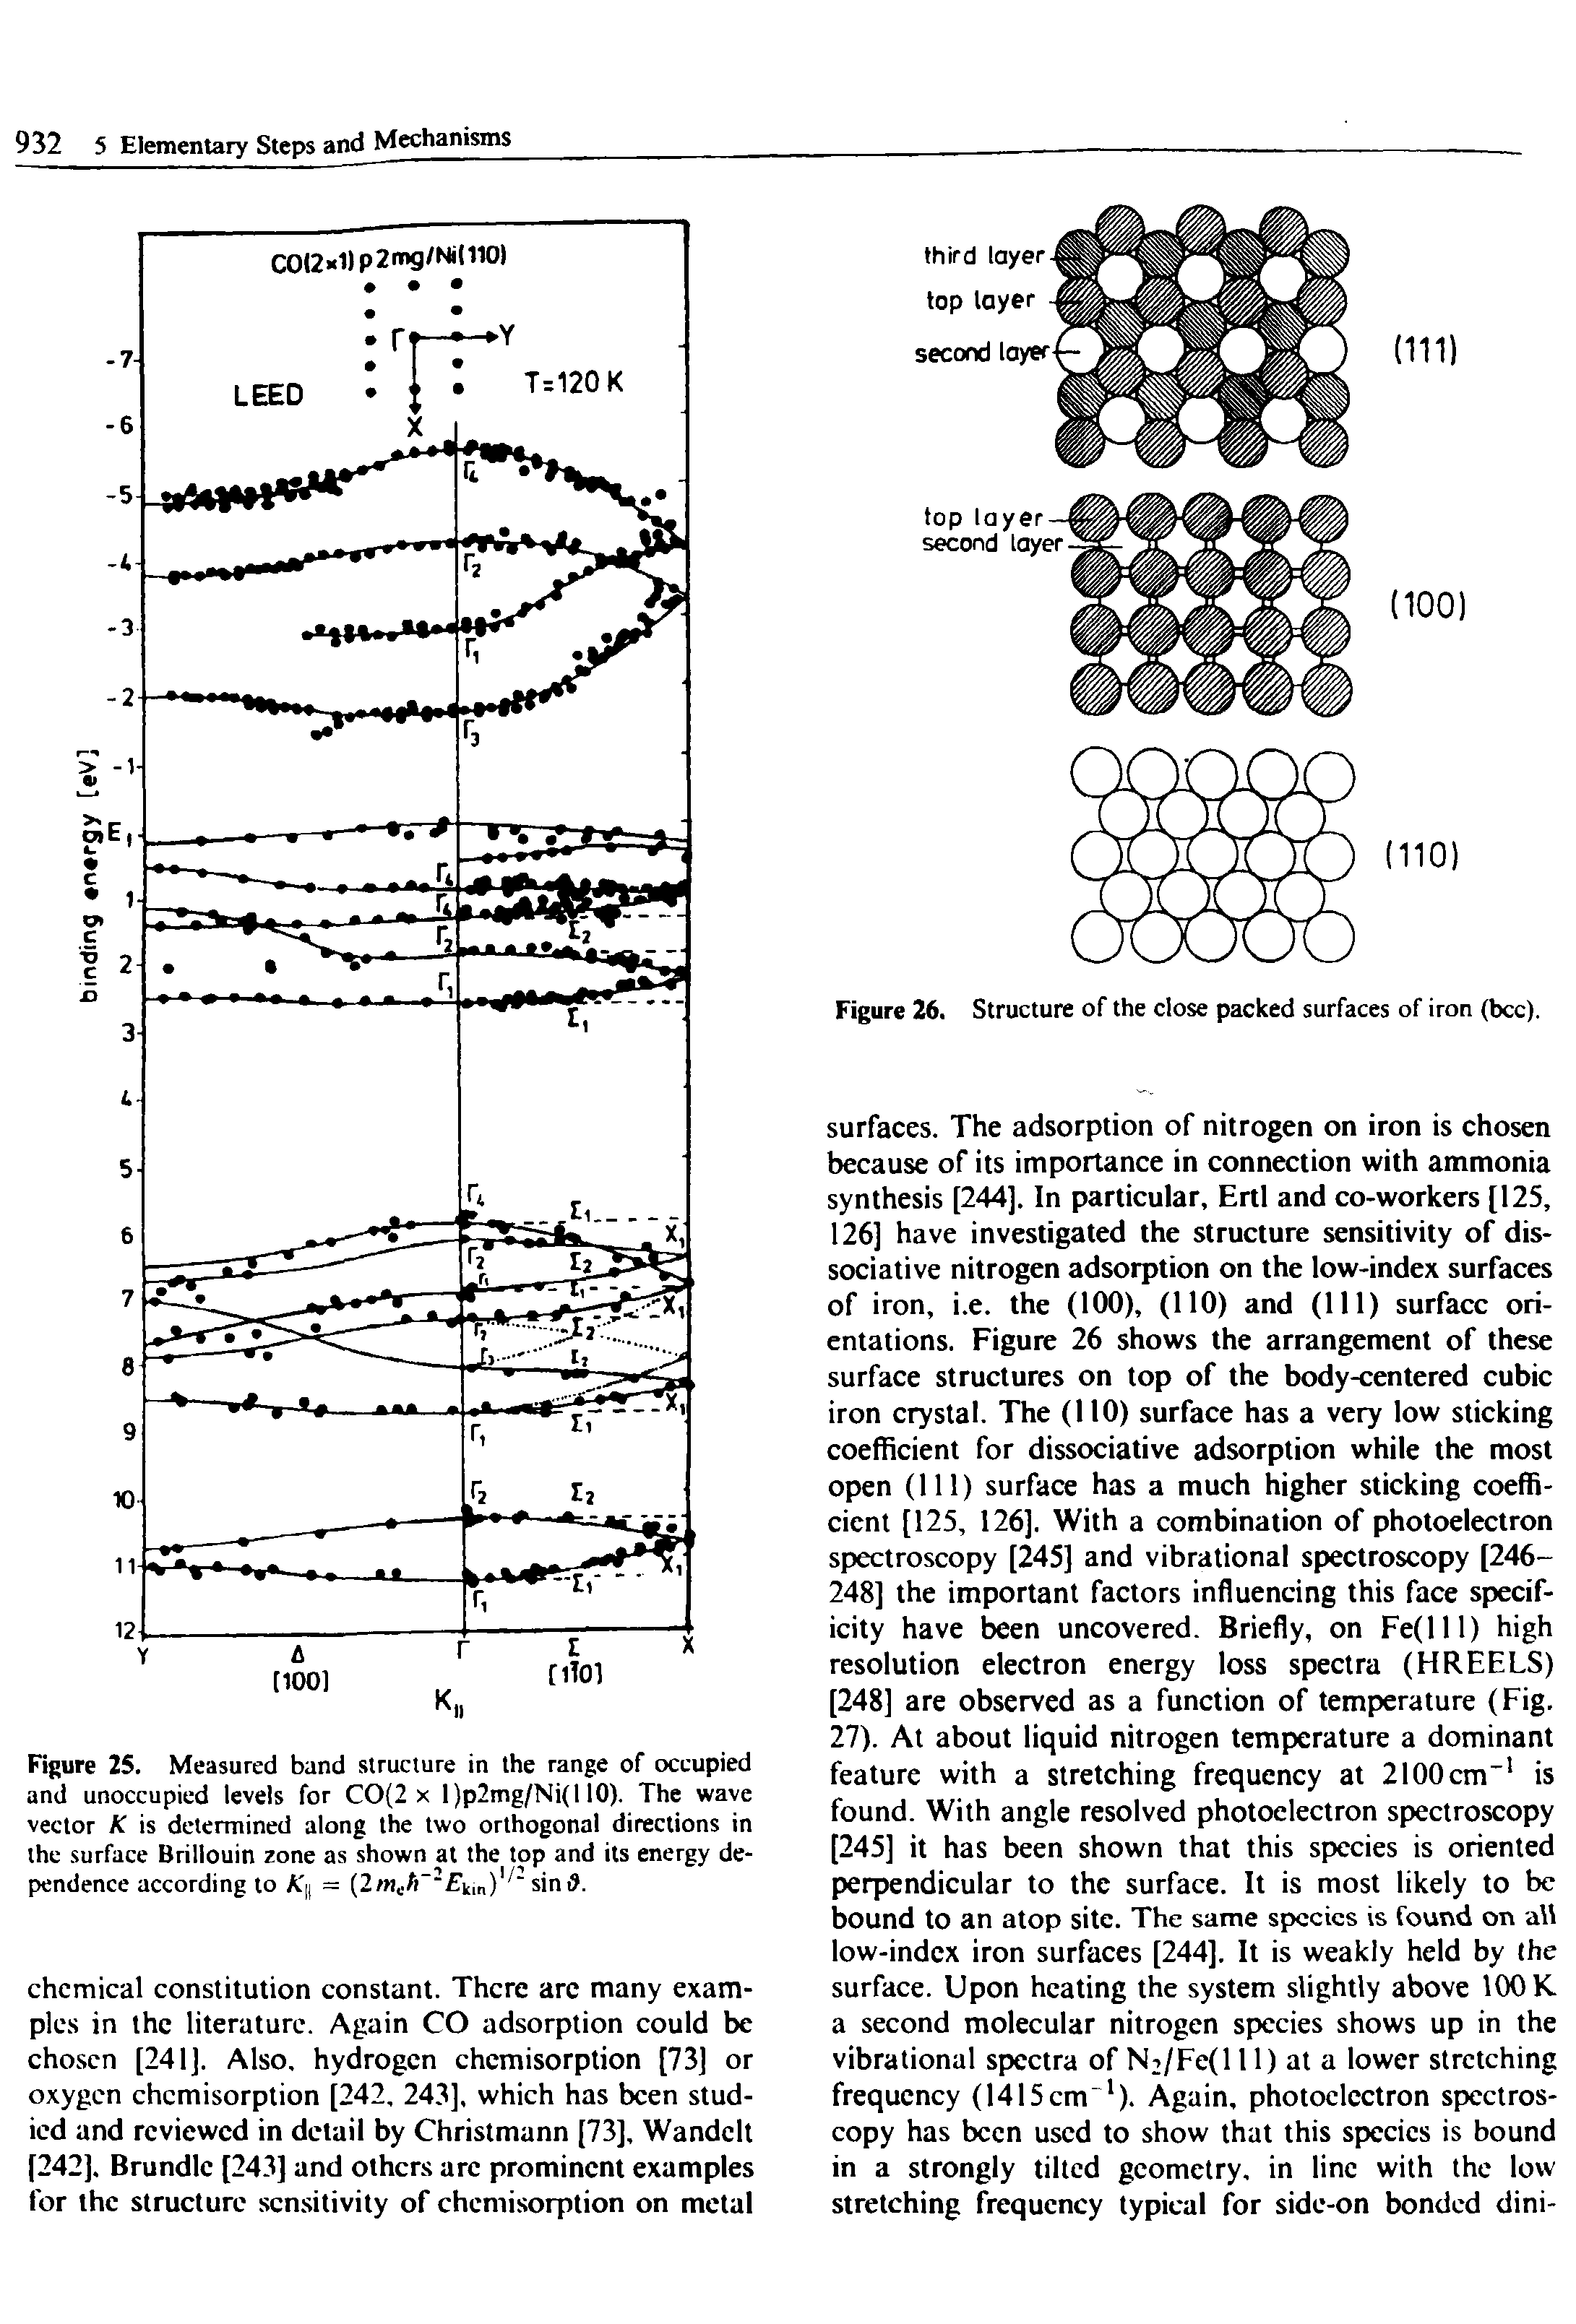 Figure 25. Measured band structure in the range of occupied and unoccupied levels for CO(2 x I)p2mg/Ni(l 10). The wave vector K is determined along the two orthogonal directions in the surface Brillouin zone as shown at the top and its energy dependence according to = (2wcfr kin)l/ sin i .